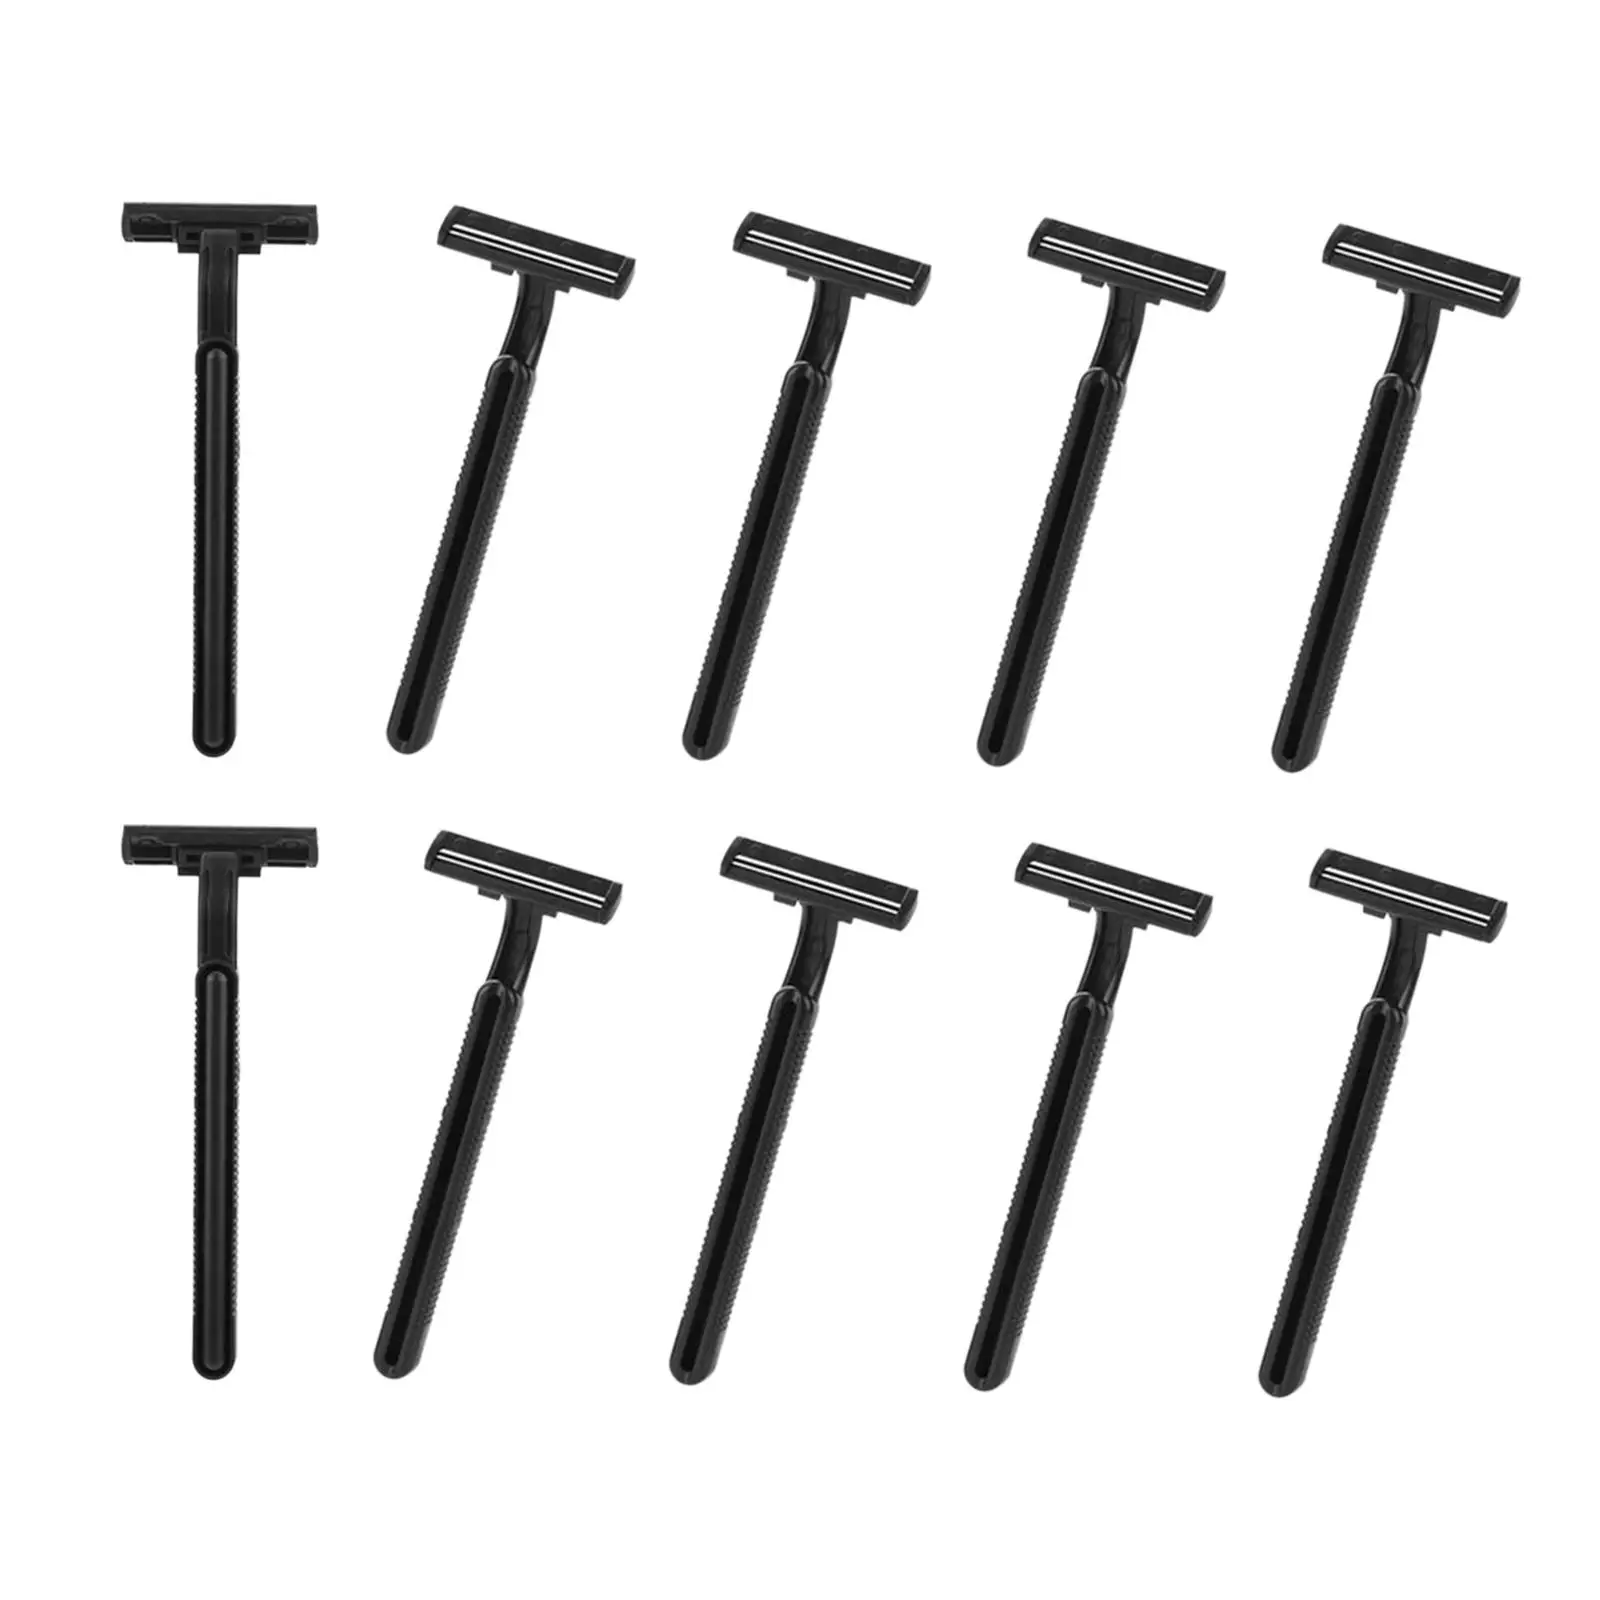 10x Classic Men Disposable Shaver Long Handle Grooming Tool Beard Shaver Face Hair Removal for Men Barber Shop Use